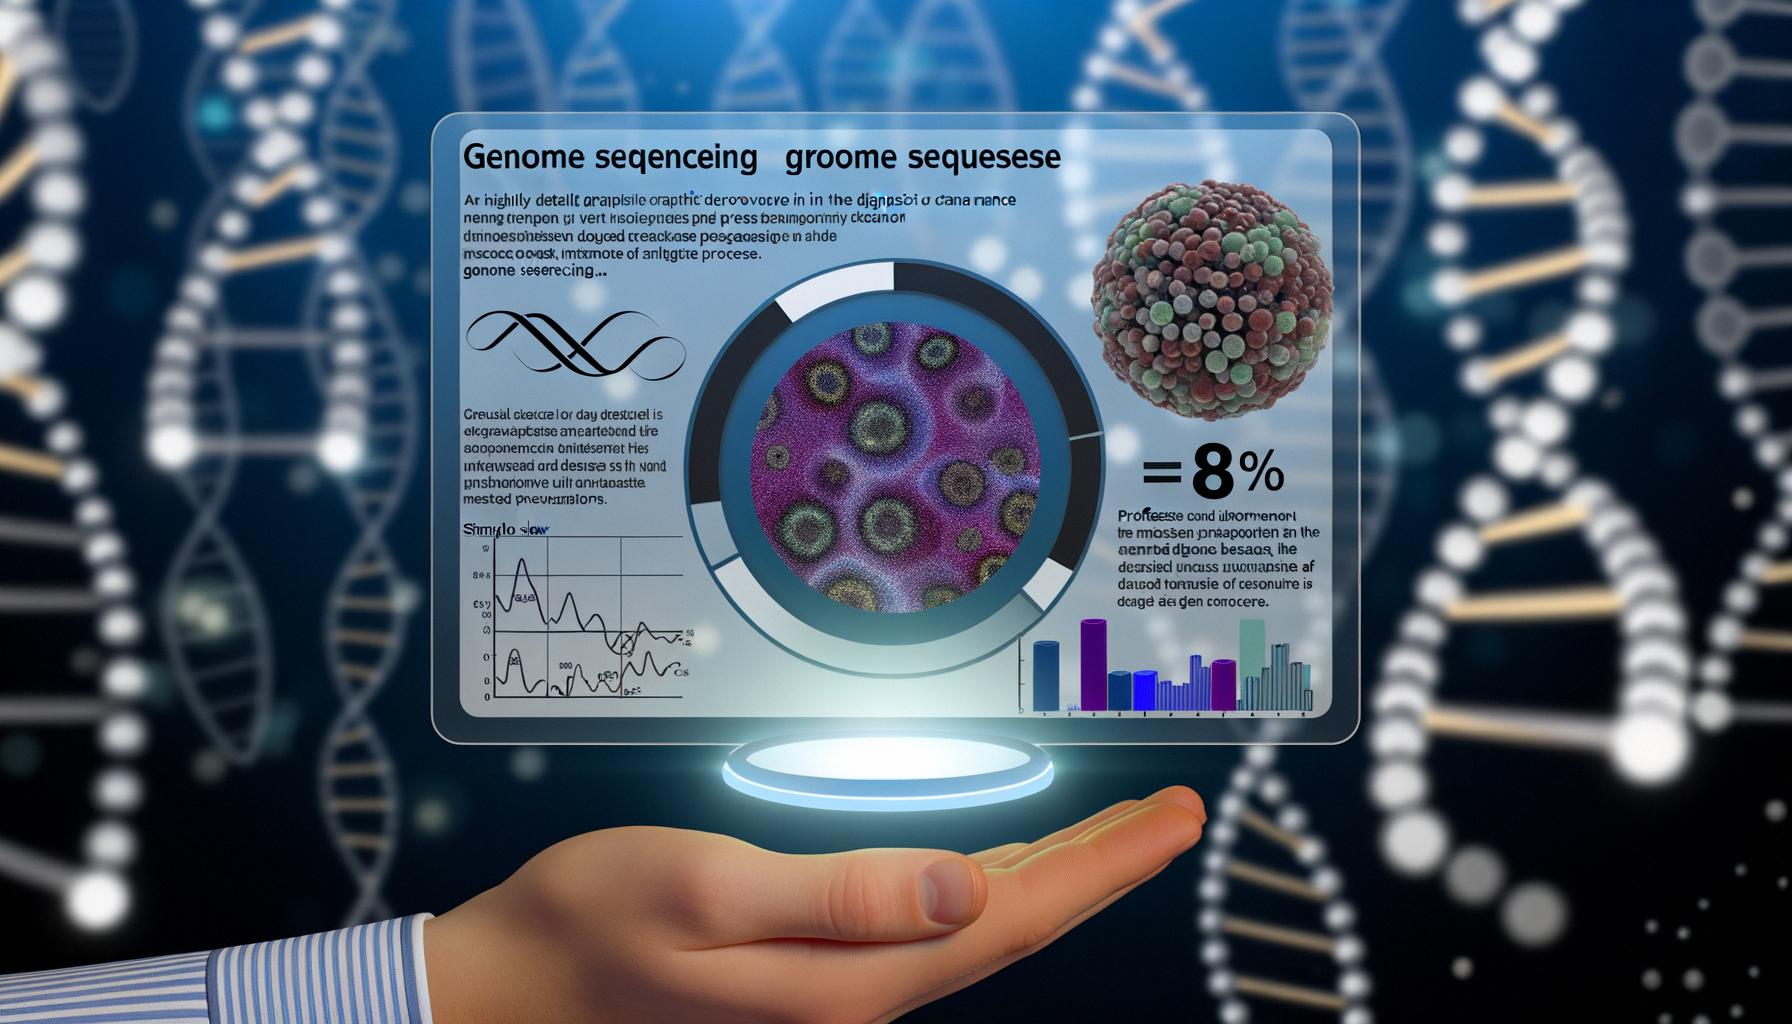 Genome sequencing improves rare disease diagnoses by 8% Balanced News